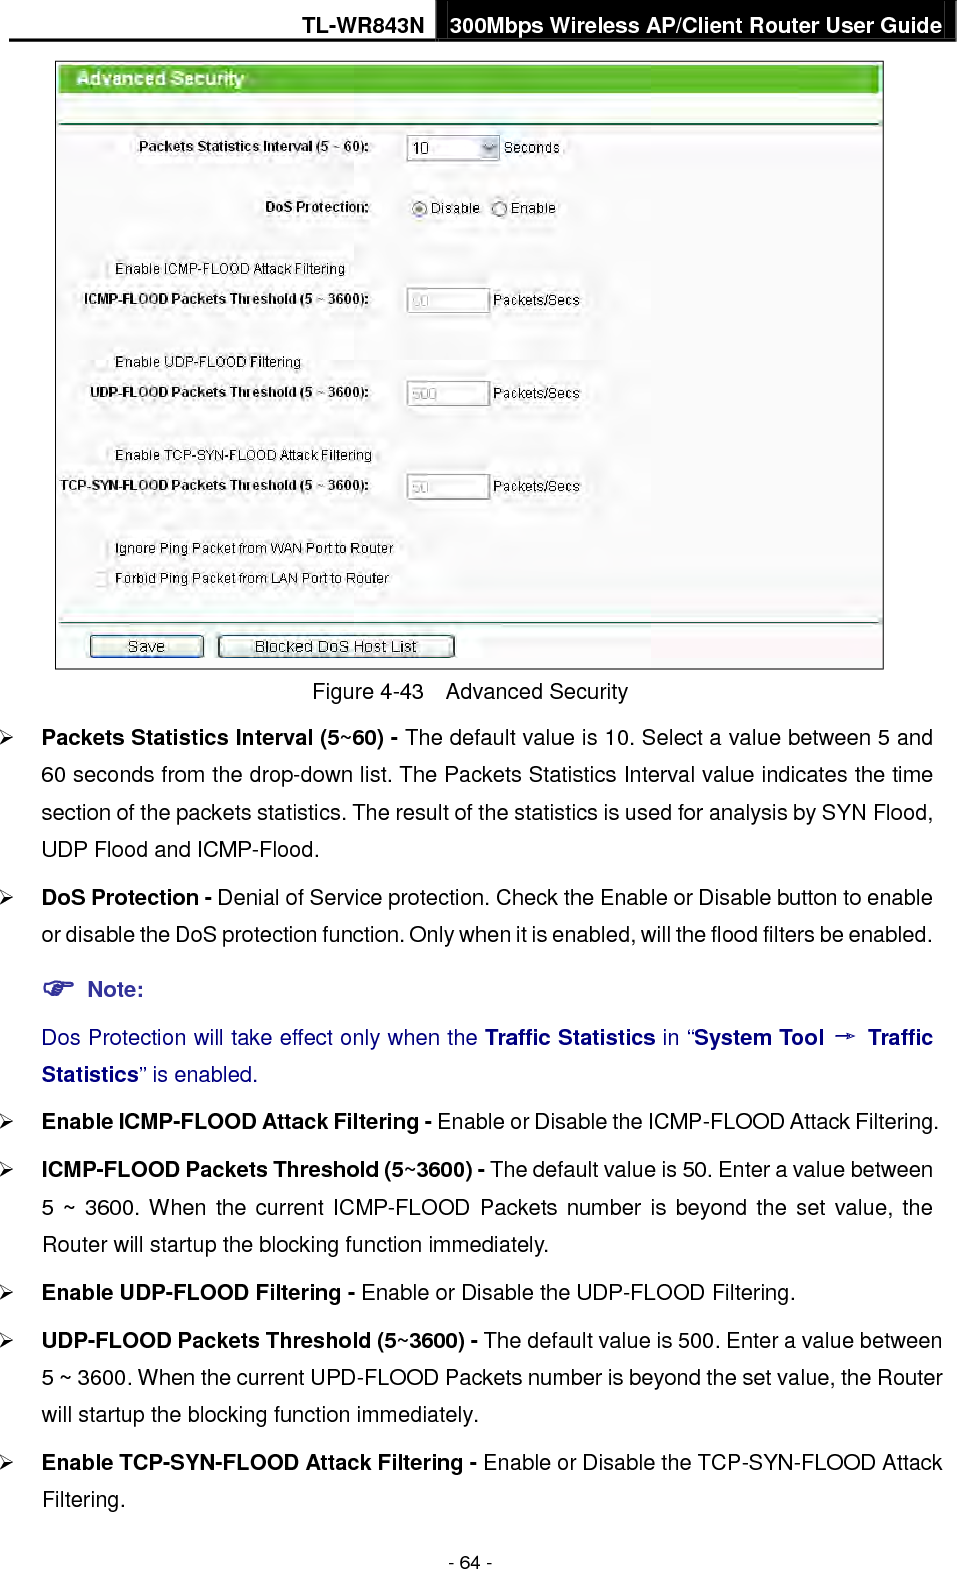 TL-WR843N 300Mbps Wireless AP/Client Router User Guide - 64 - Figure 4-43  Advanced Security Packets Statistics Interval (5~60) - The default value is 10. Select a value between 5 and60 seconds from the drop-down list. The Packets Statistics Interval value indicates the timesection of the packets statistics. The result of the statistics is used for analysis by SYN Flood,UDP Flood and ICMP-Flood.DoS Protection - Denial of Service protection. Check the Enable or Disable button to enableor disable the DoS protection function. Only when it is enabled, will the flood filters be enabled. Note:Dos Protection will take effect only when the Traffic Statistics in “System Tool → TrafficStatistics” is enabled.Enable ICMP-FLOOD Attack Filtering - Enable or Disable the ICMP-FLOOD Attack Filtering.ICMP-FLOOD Packets Threshold (5~3600) - The default value is 50. Enter a value between5 ~ 3600. When the current ICMP-FLOOD Packets number is beyond the set value, theRouter will startup the blocking function immediately.Enable UDP-FLOOD Filtering - Enable or Disable the UDP-FLOOD Filtering.UDP-FLOOD Packets Threshold (5~3600) - The default value is 500. Enter a value between5 ~ 3600. When the current UPD-FLOOD Packets number is beyond the set value, the Routerwill startup the blocking function immediately.Enable TCP-SYN-FLOOD Attack Filtering - Enable or Disable the TCP-SYN-FLOOD AttackFiltering.